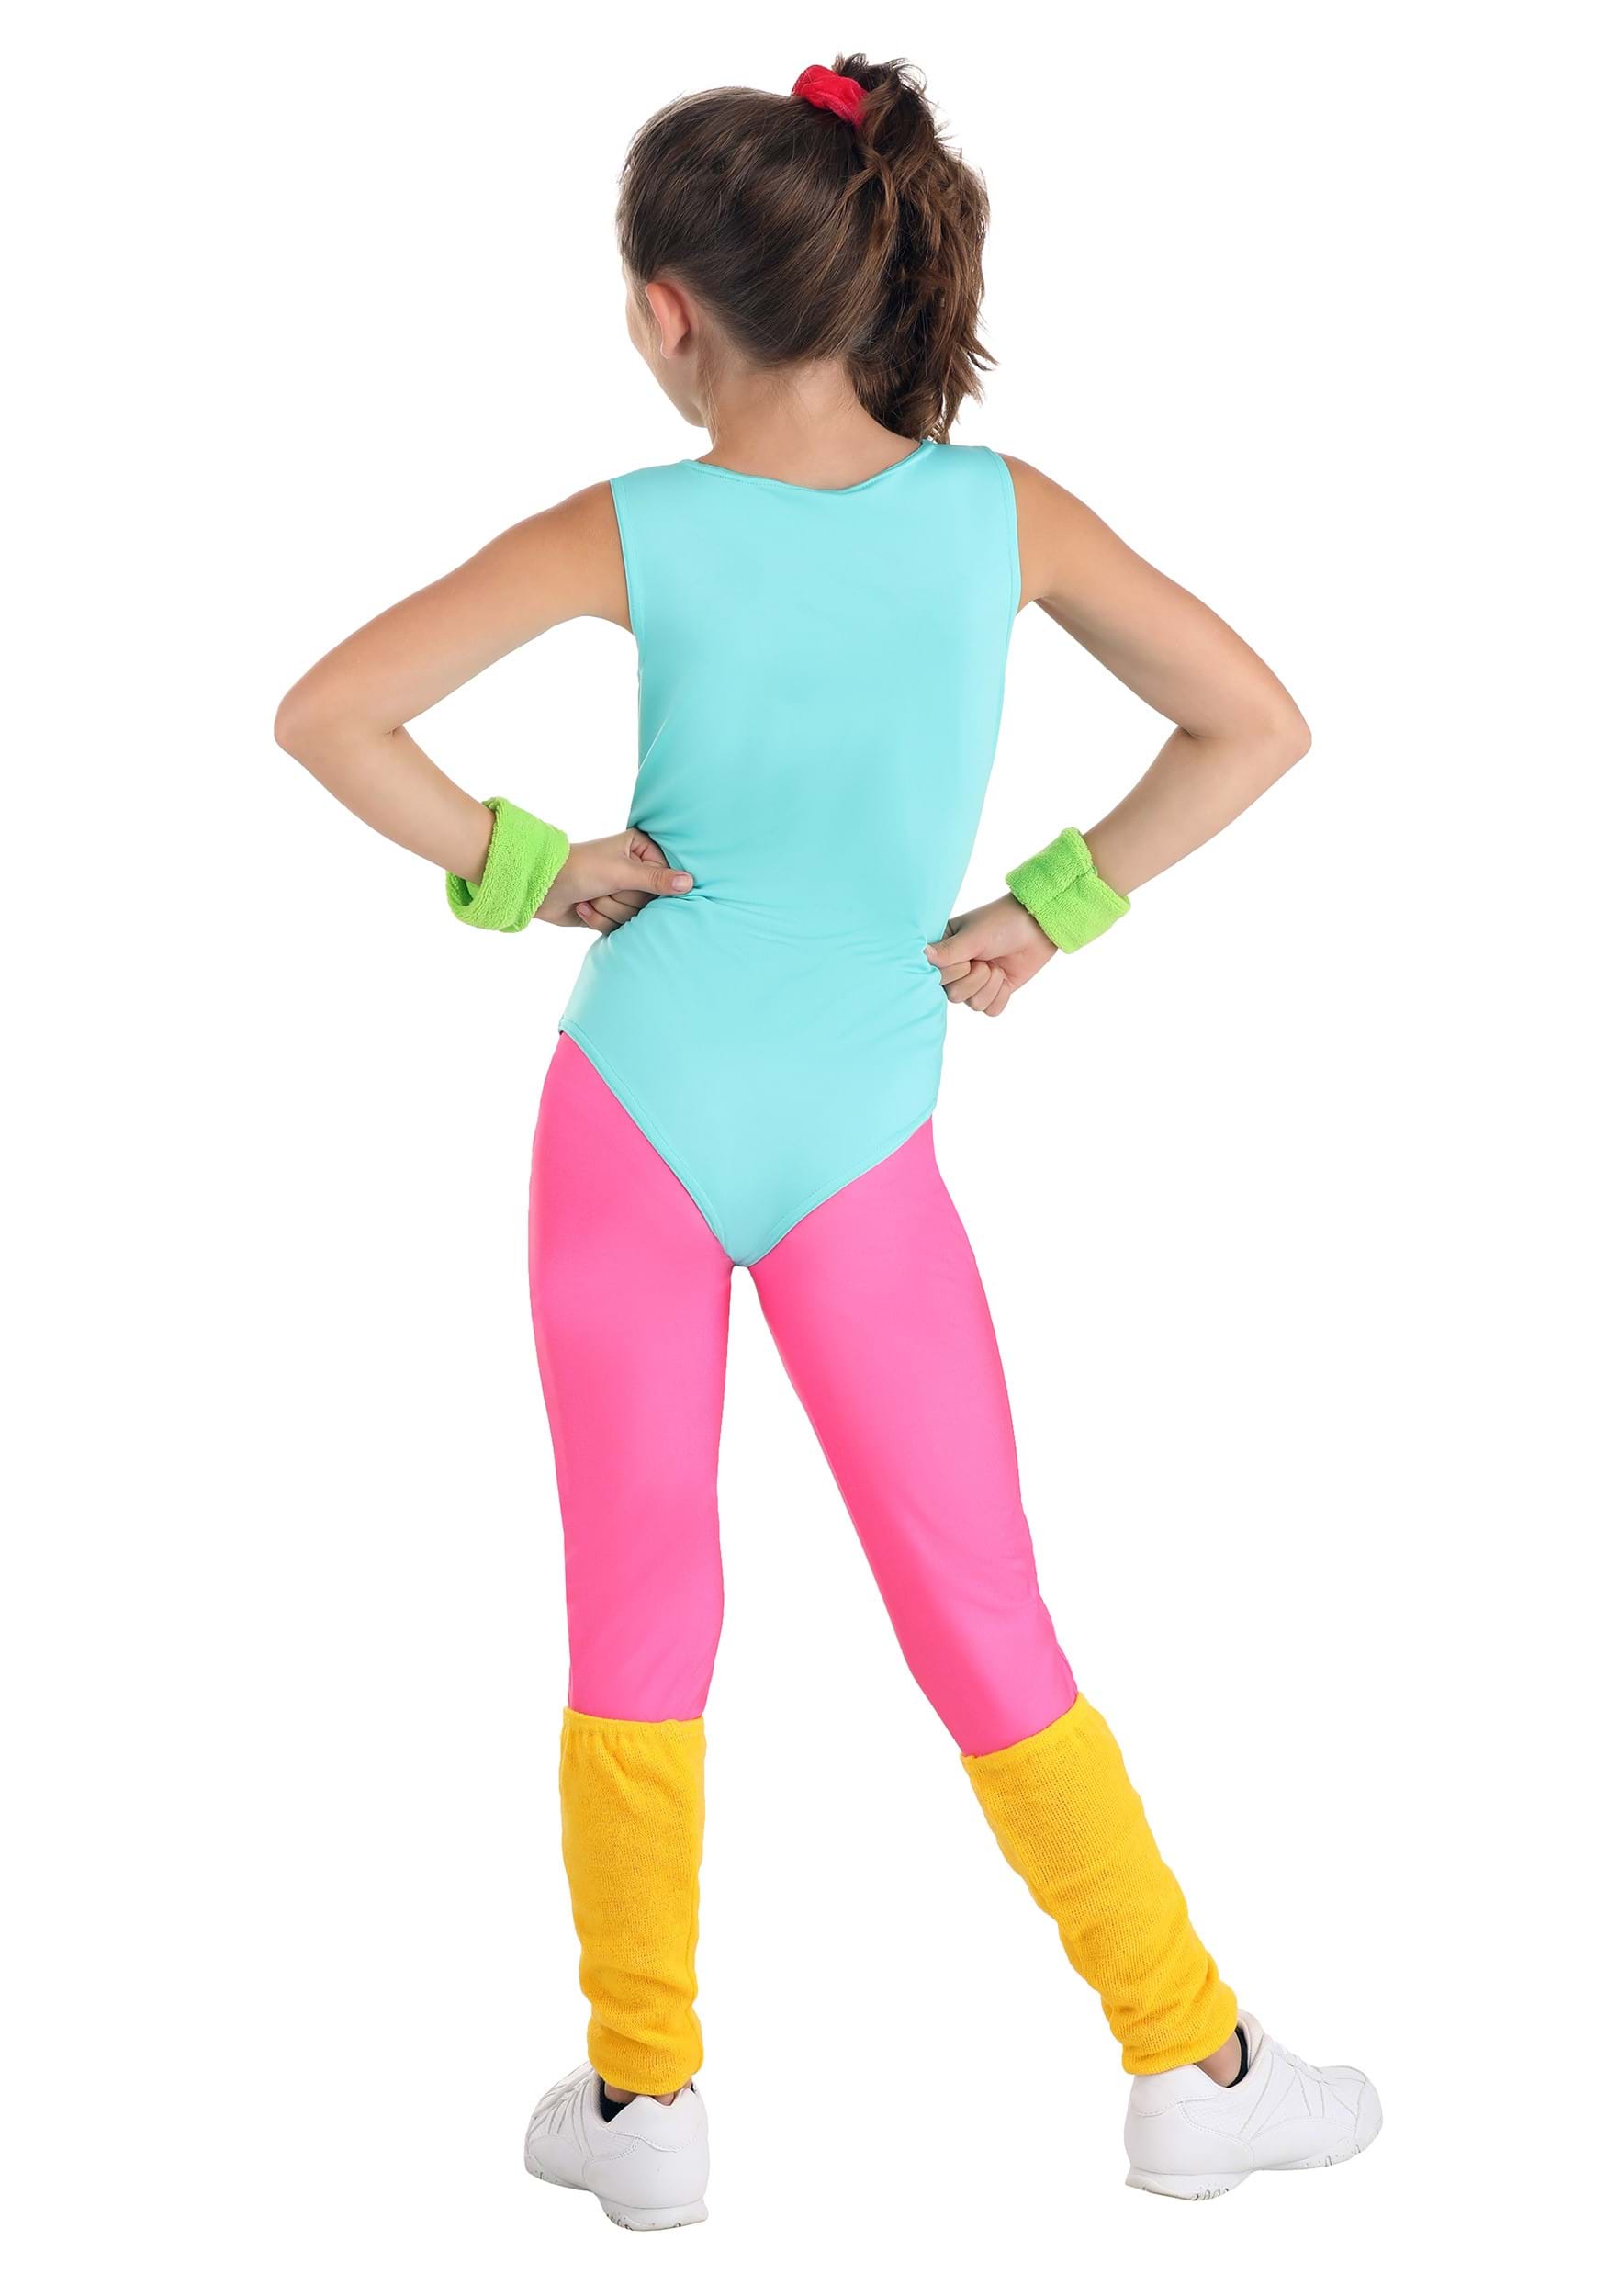 4 Costumes from the 1980's that are Cooler than an Aerobics Outfit